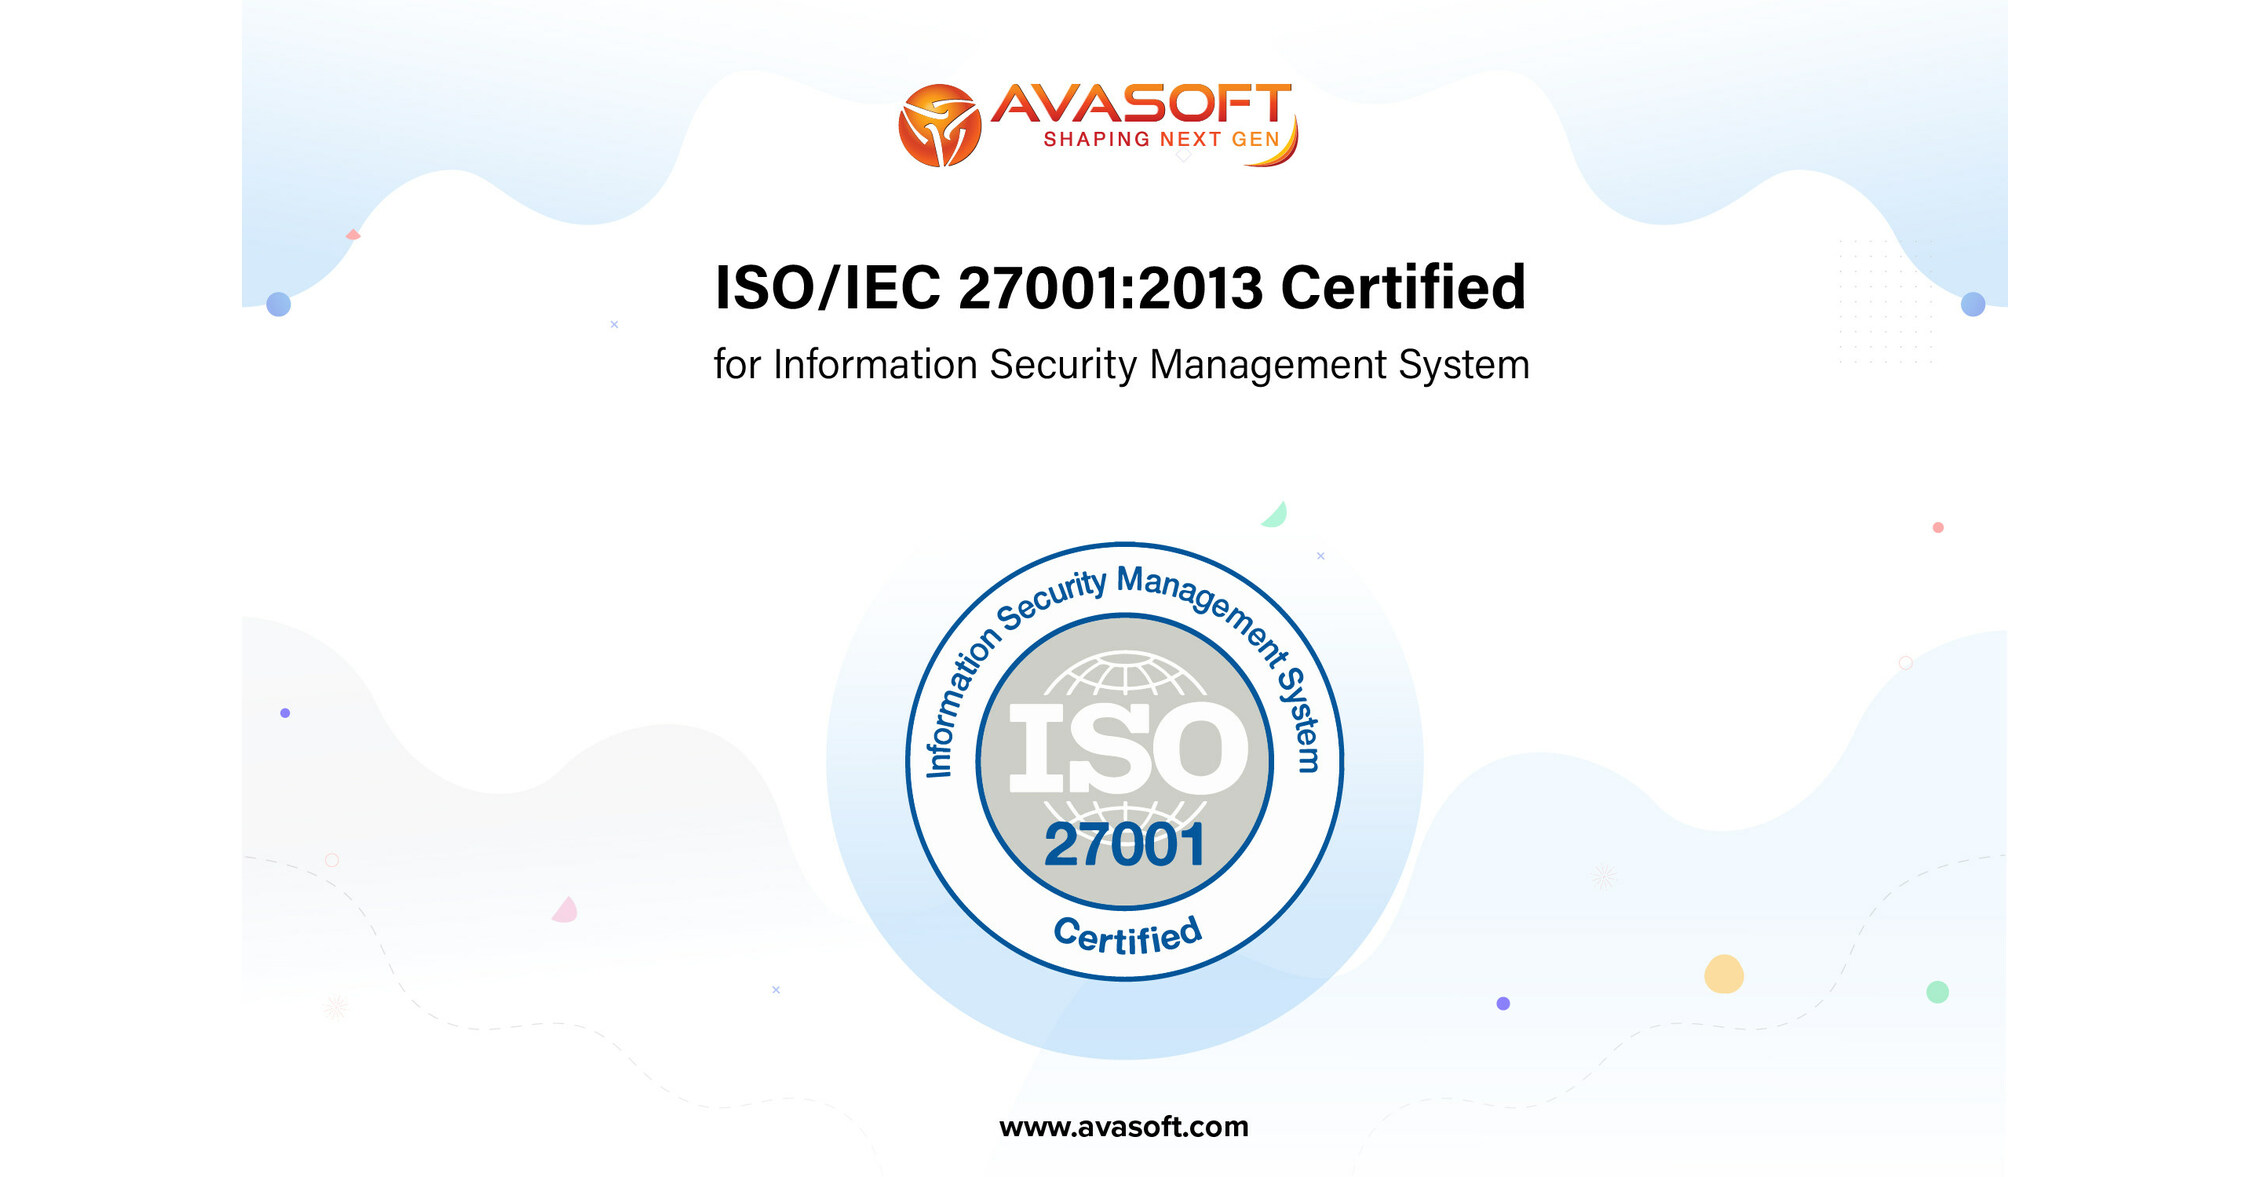 AVASOFT ISO/IES 27001:2015 Certified for Information Security Management System Certification (ISMS)